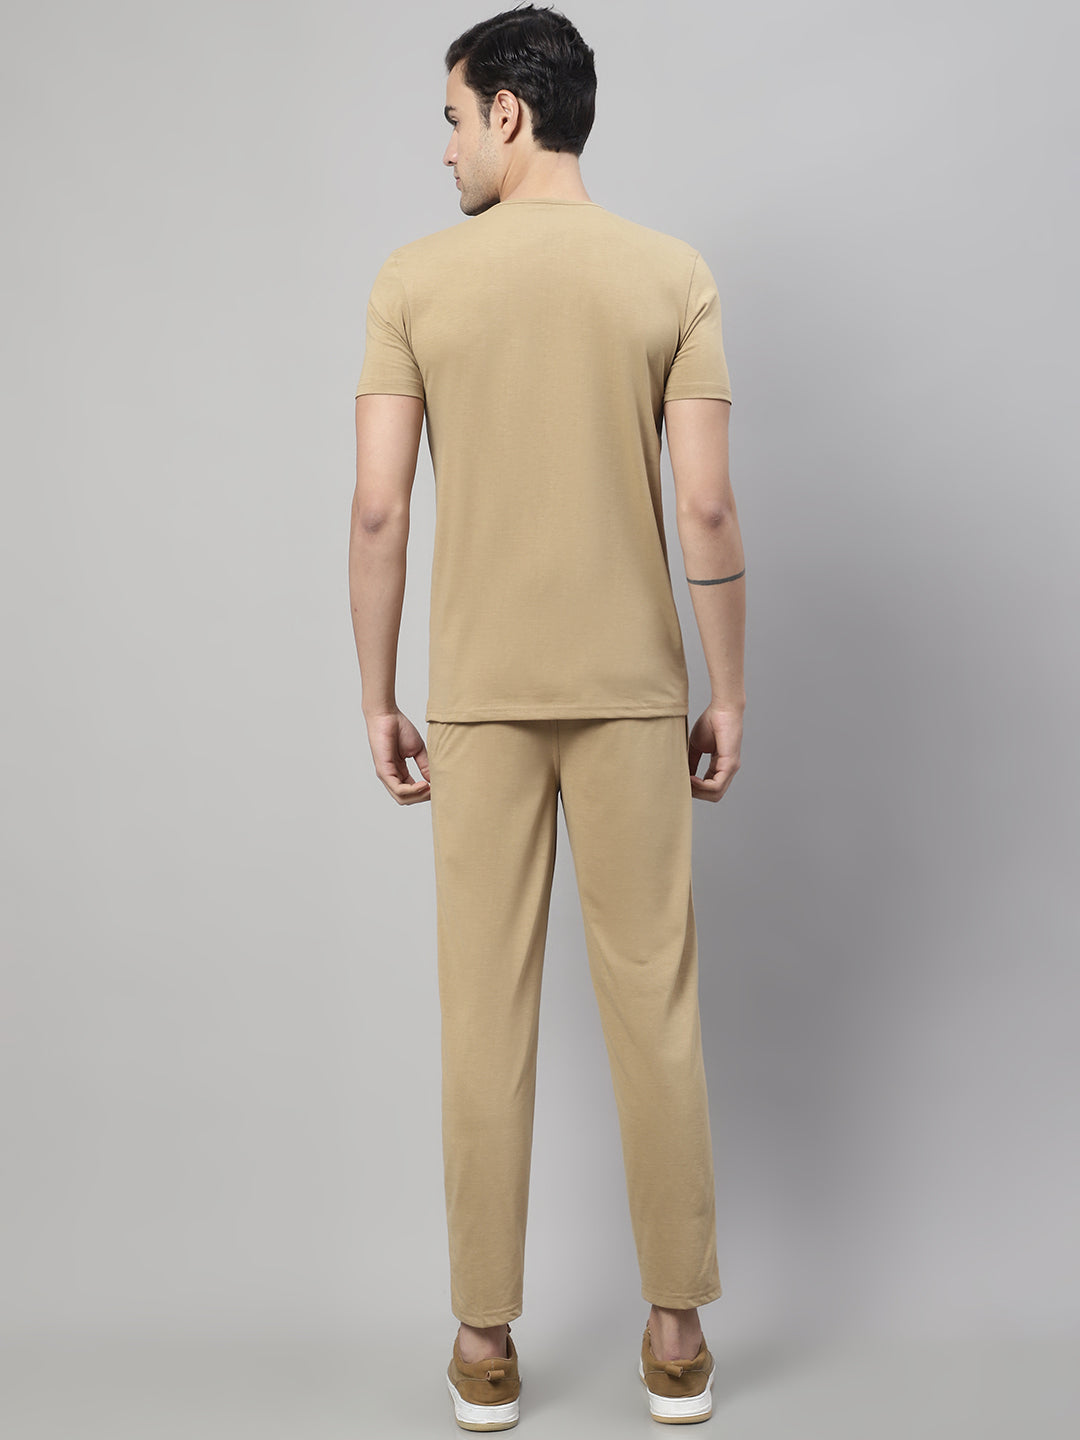 Buy Mens Slim Fit Solid Linen skin Color Trouser Online  699 from  ShopClues